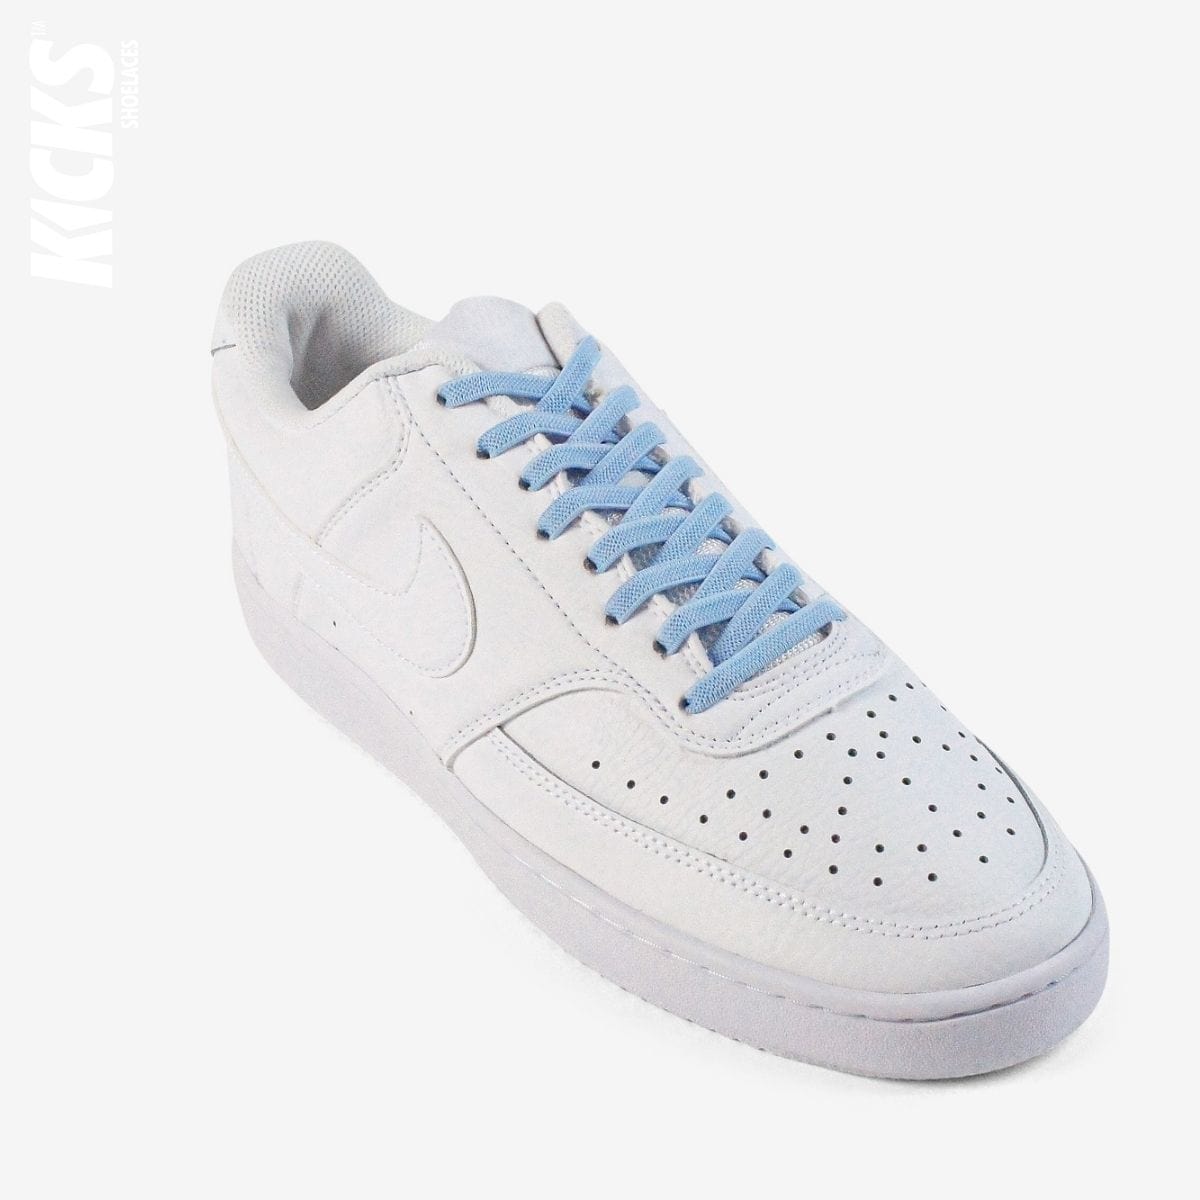 no-tie-shoelaces-with-sky-blue-laces-on-nike-white-sneakers-by-kicks-shoelaces